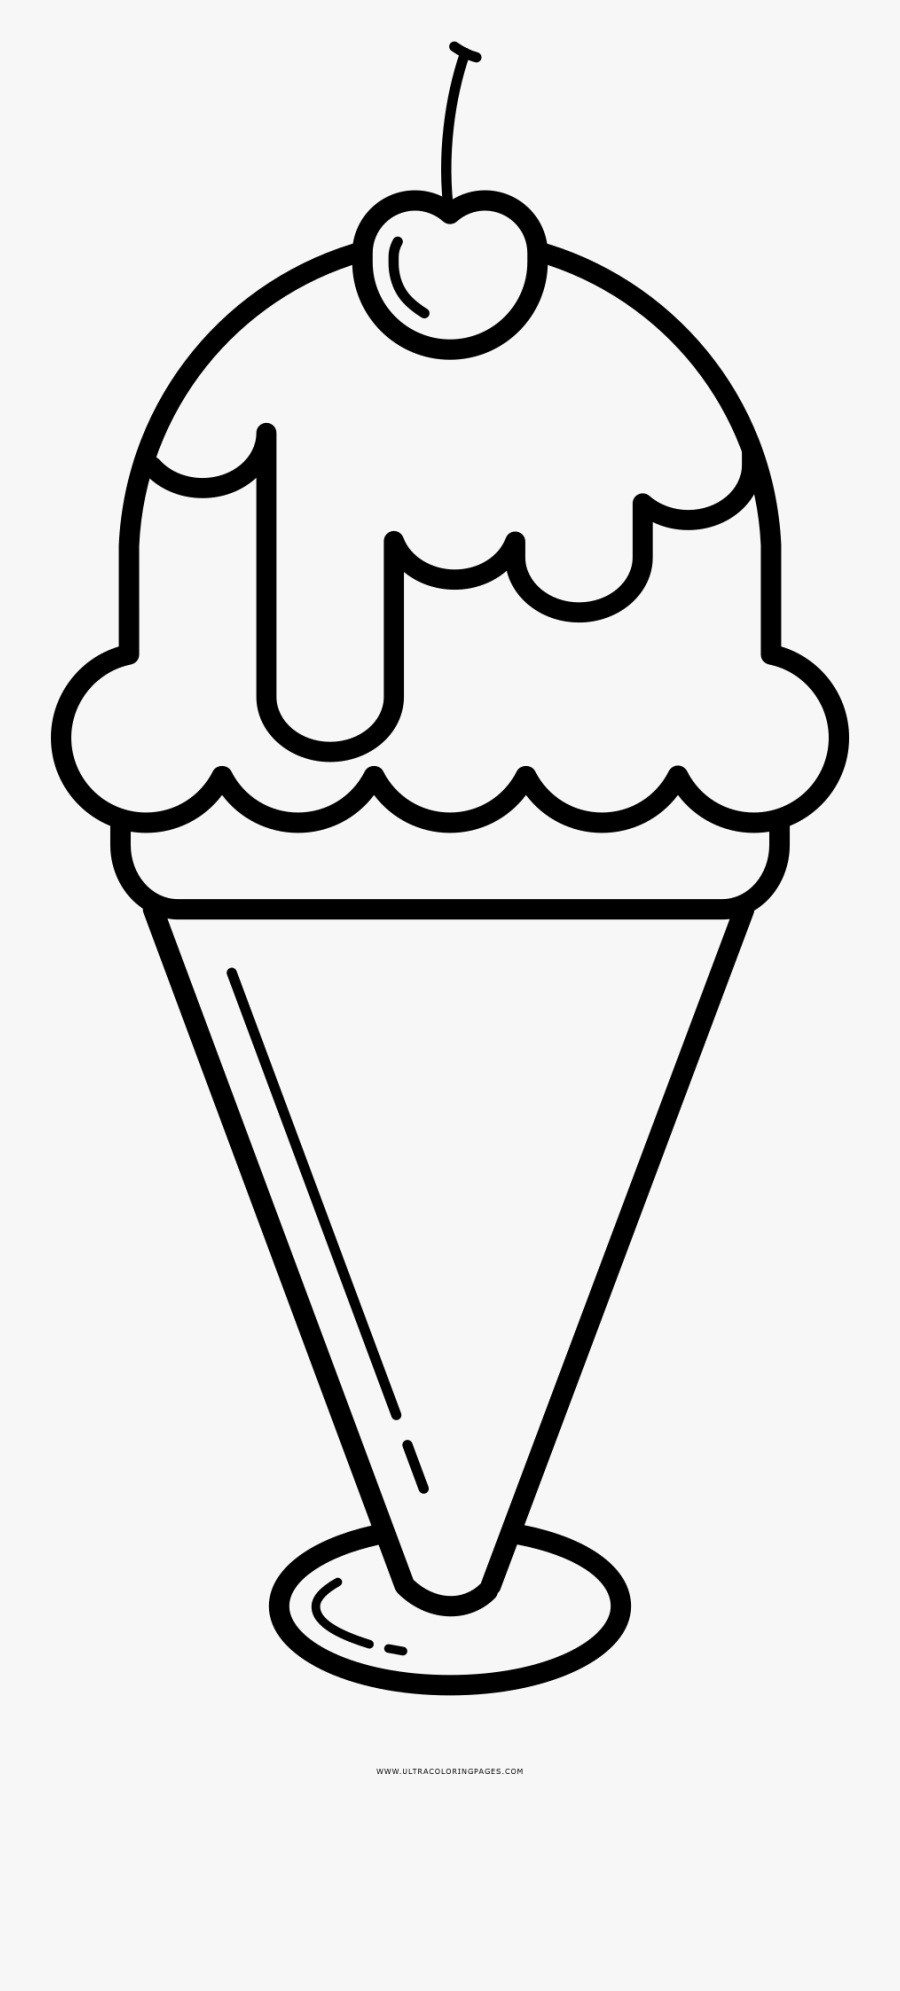 Ice Cream Sundae Coloring Page - Sunday Ice Cream Drawings, Transparent Clipart